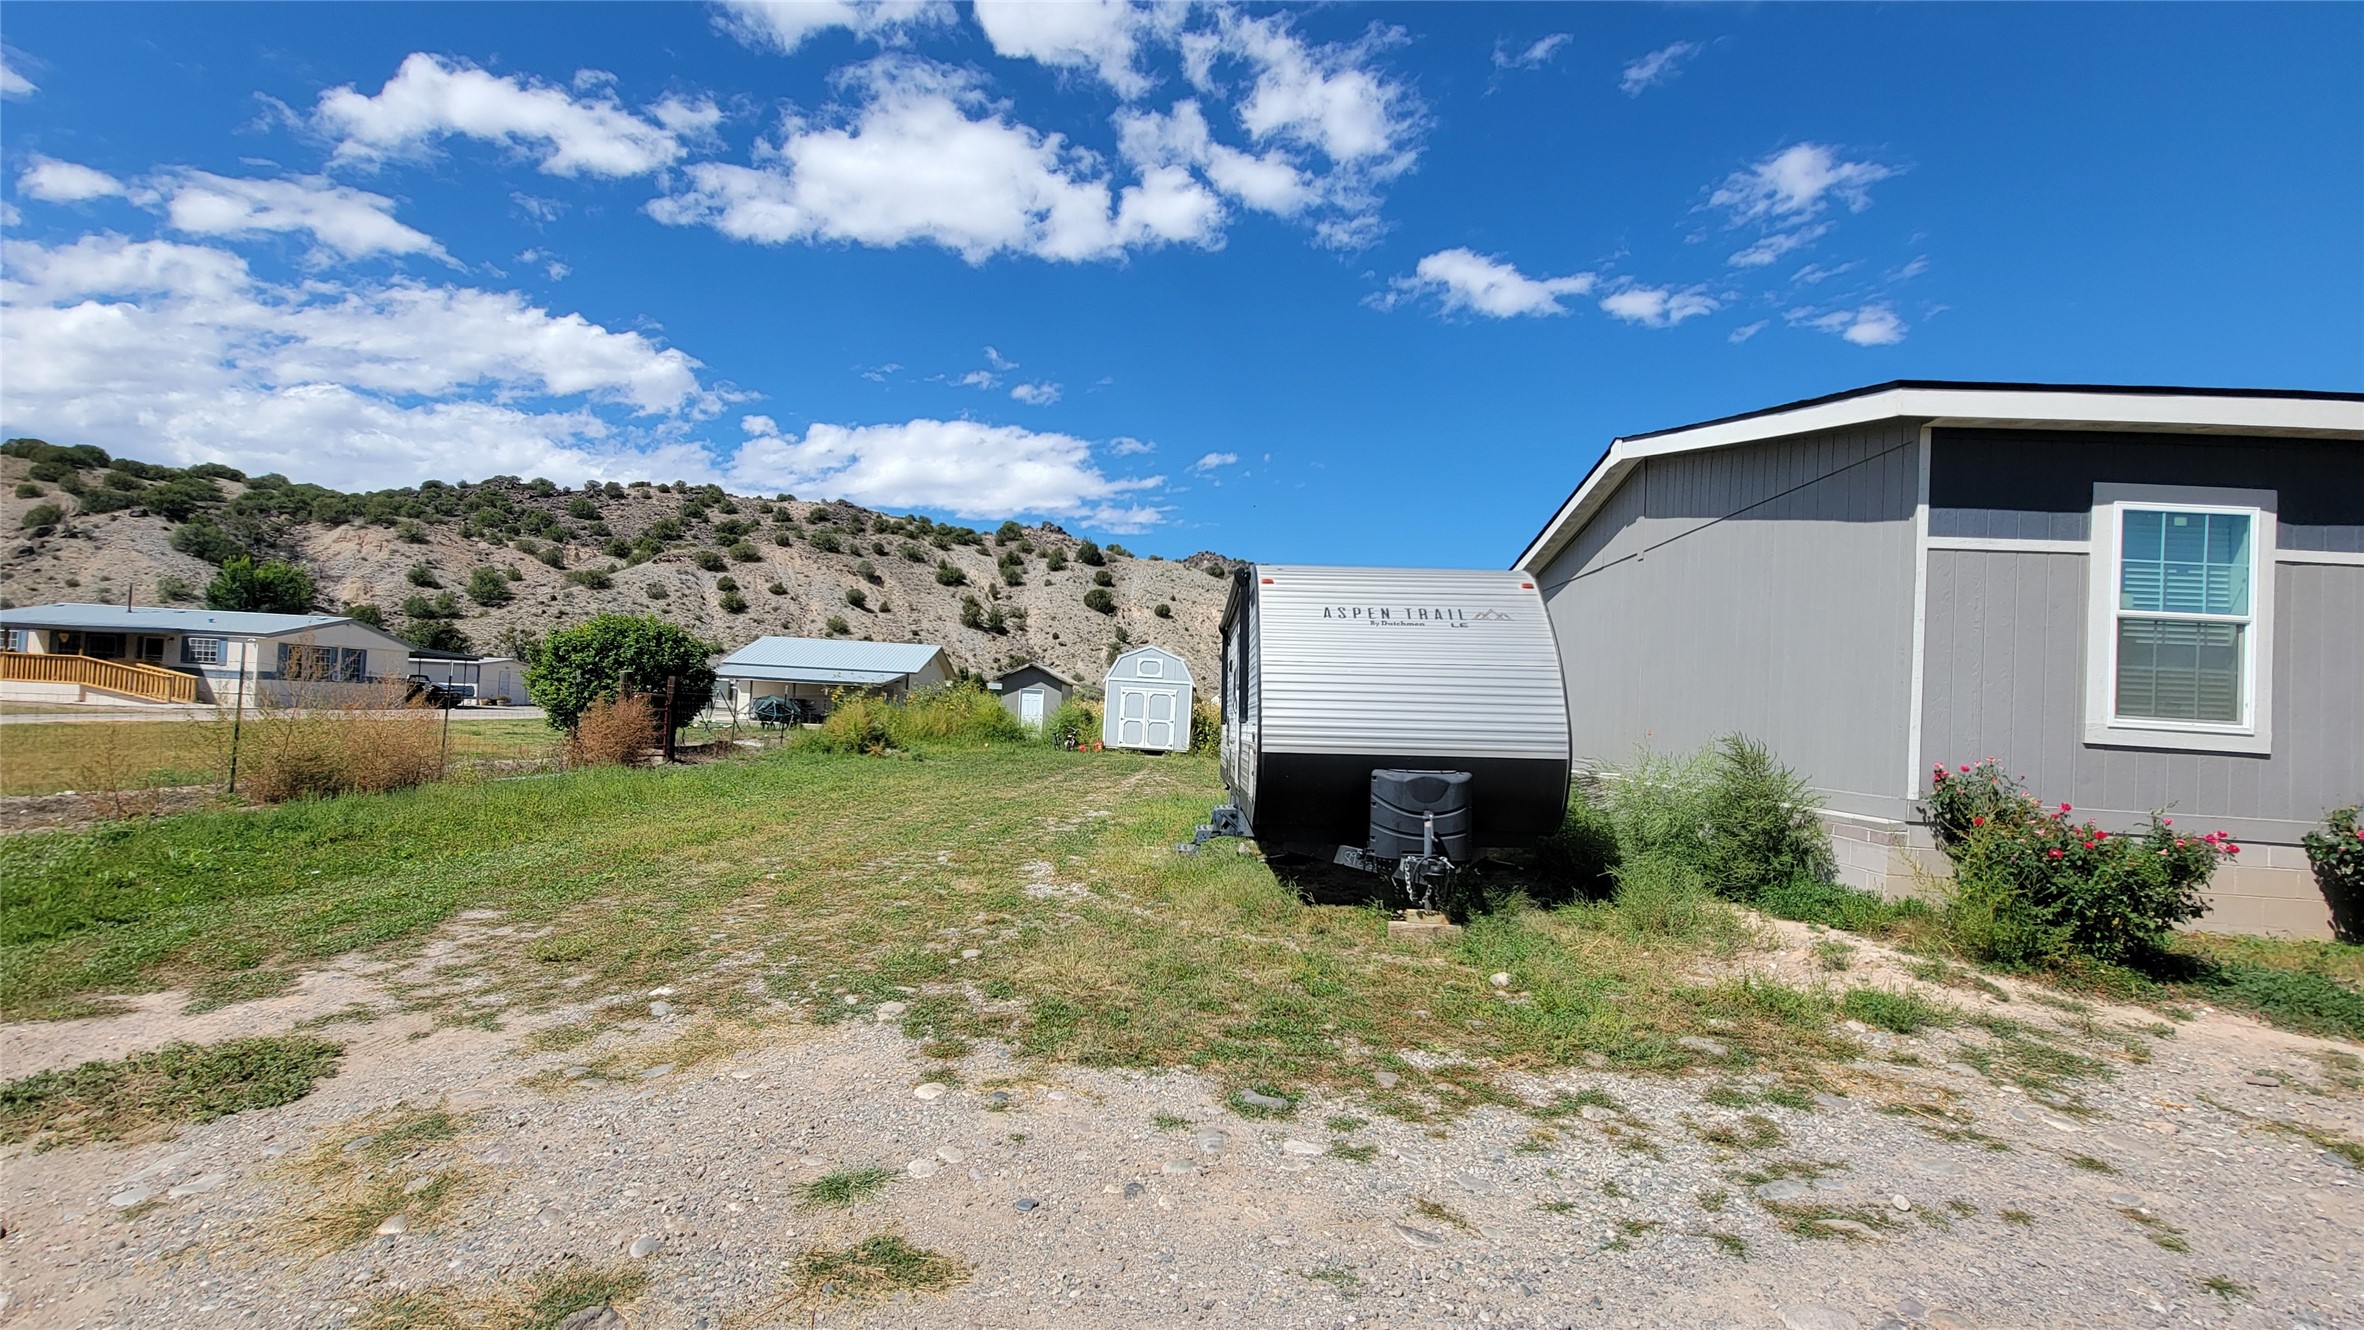 739 County Road 57, Lyden, New Mexico 87582, 4 Bedrooms Bedrooms, ,2 BathroomsBathrooms,Residential,For Sale,739 County Road 57,202233193